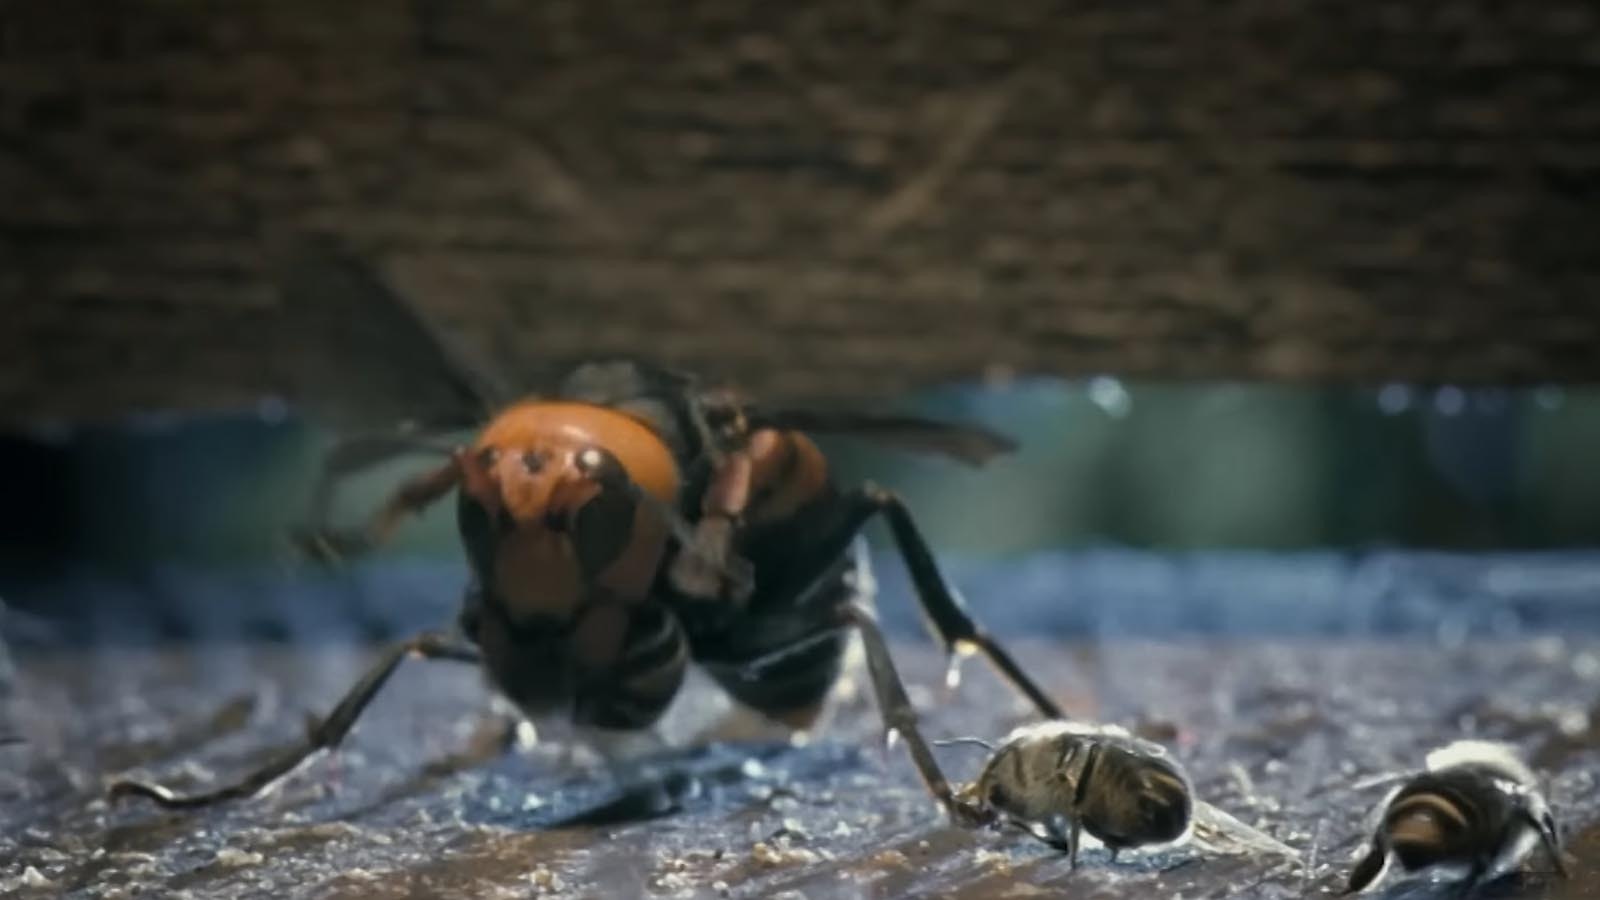 After luring a giant hornet into their hive, bees swarm it, then agitate so fast they raise the temperature in the hive and roast the hornet alive.